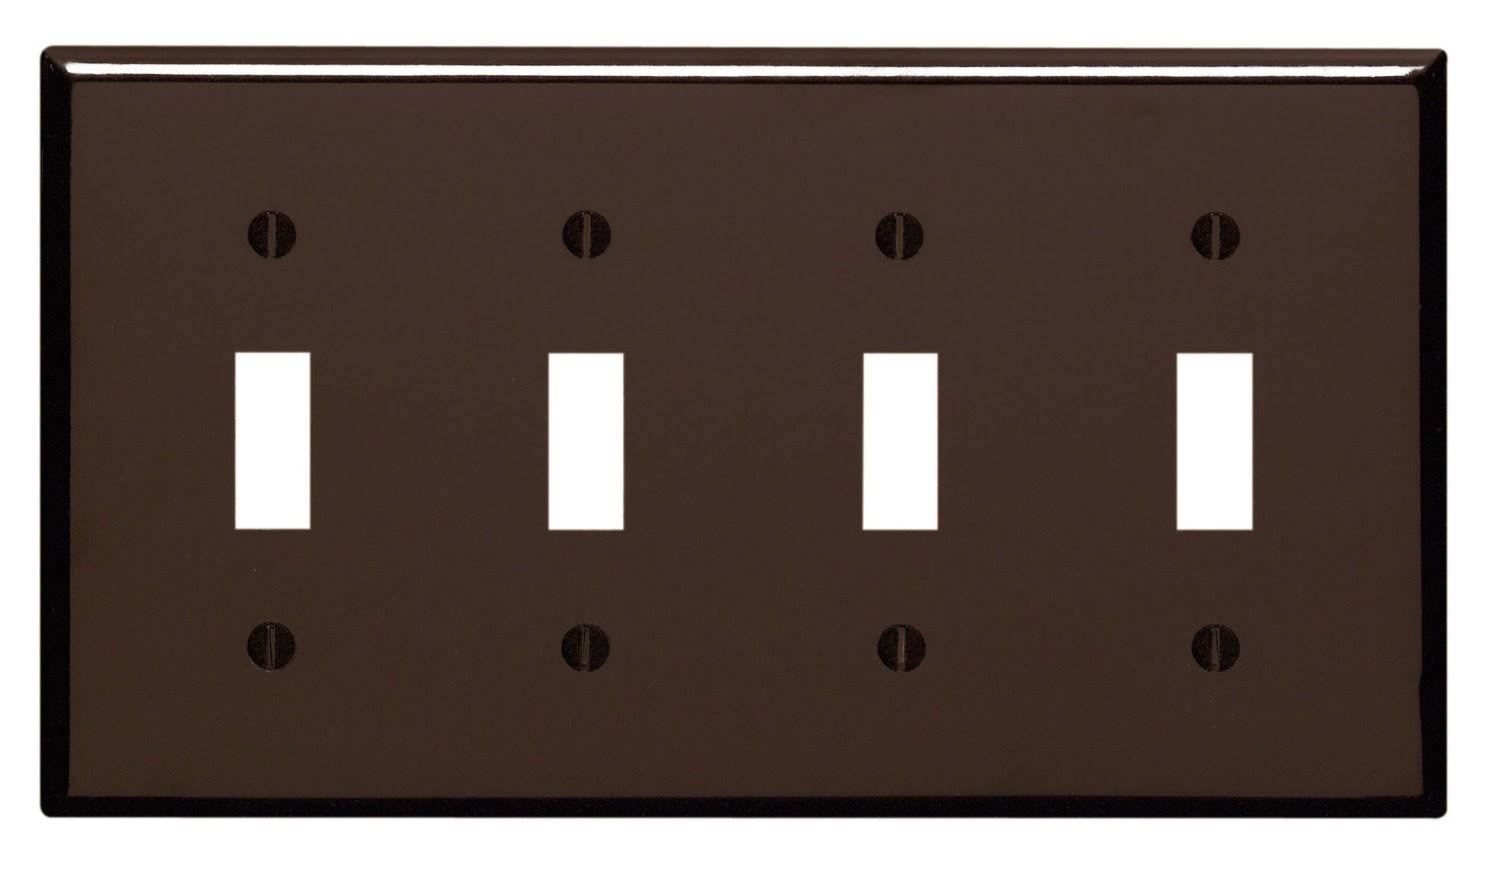 Leviton Toggle Device Switch Wall Plate - Brown, 4 gang